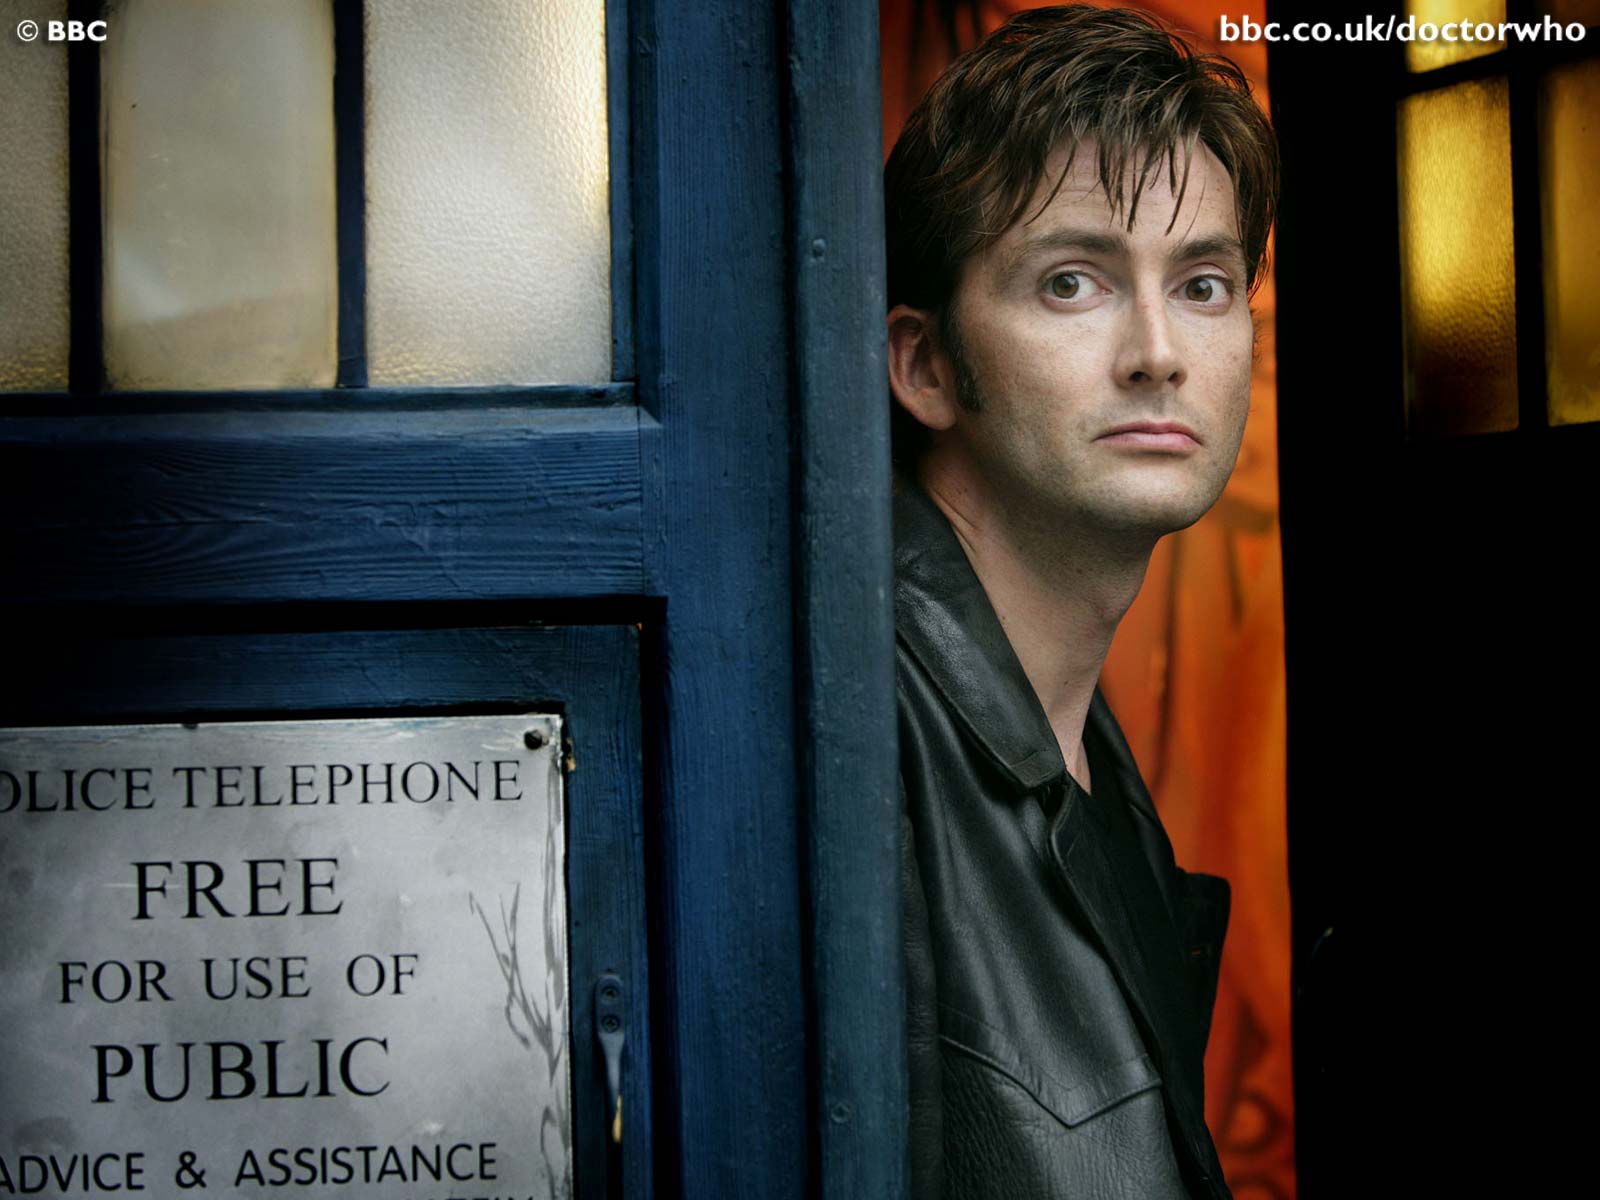 David Tennant as the Tenth Doctor Who